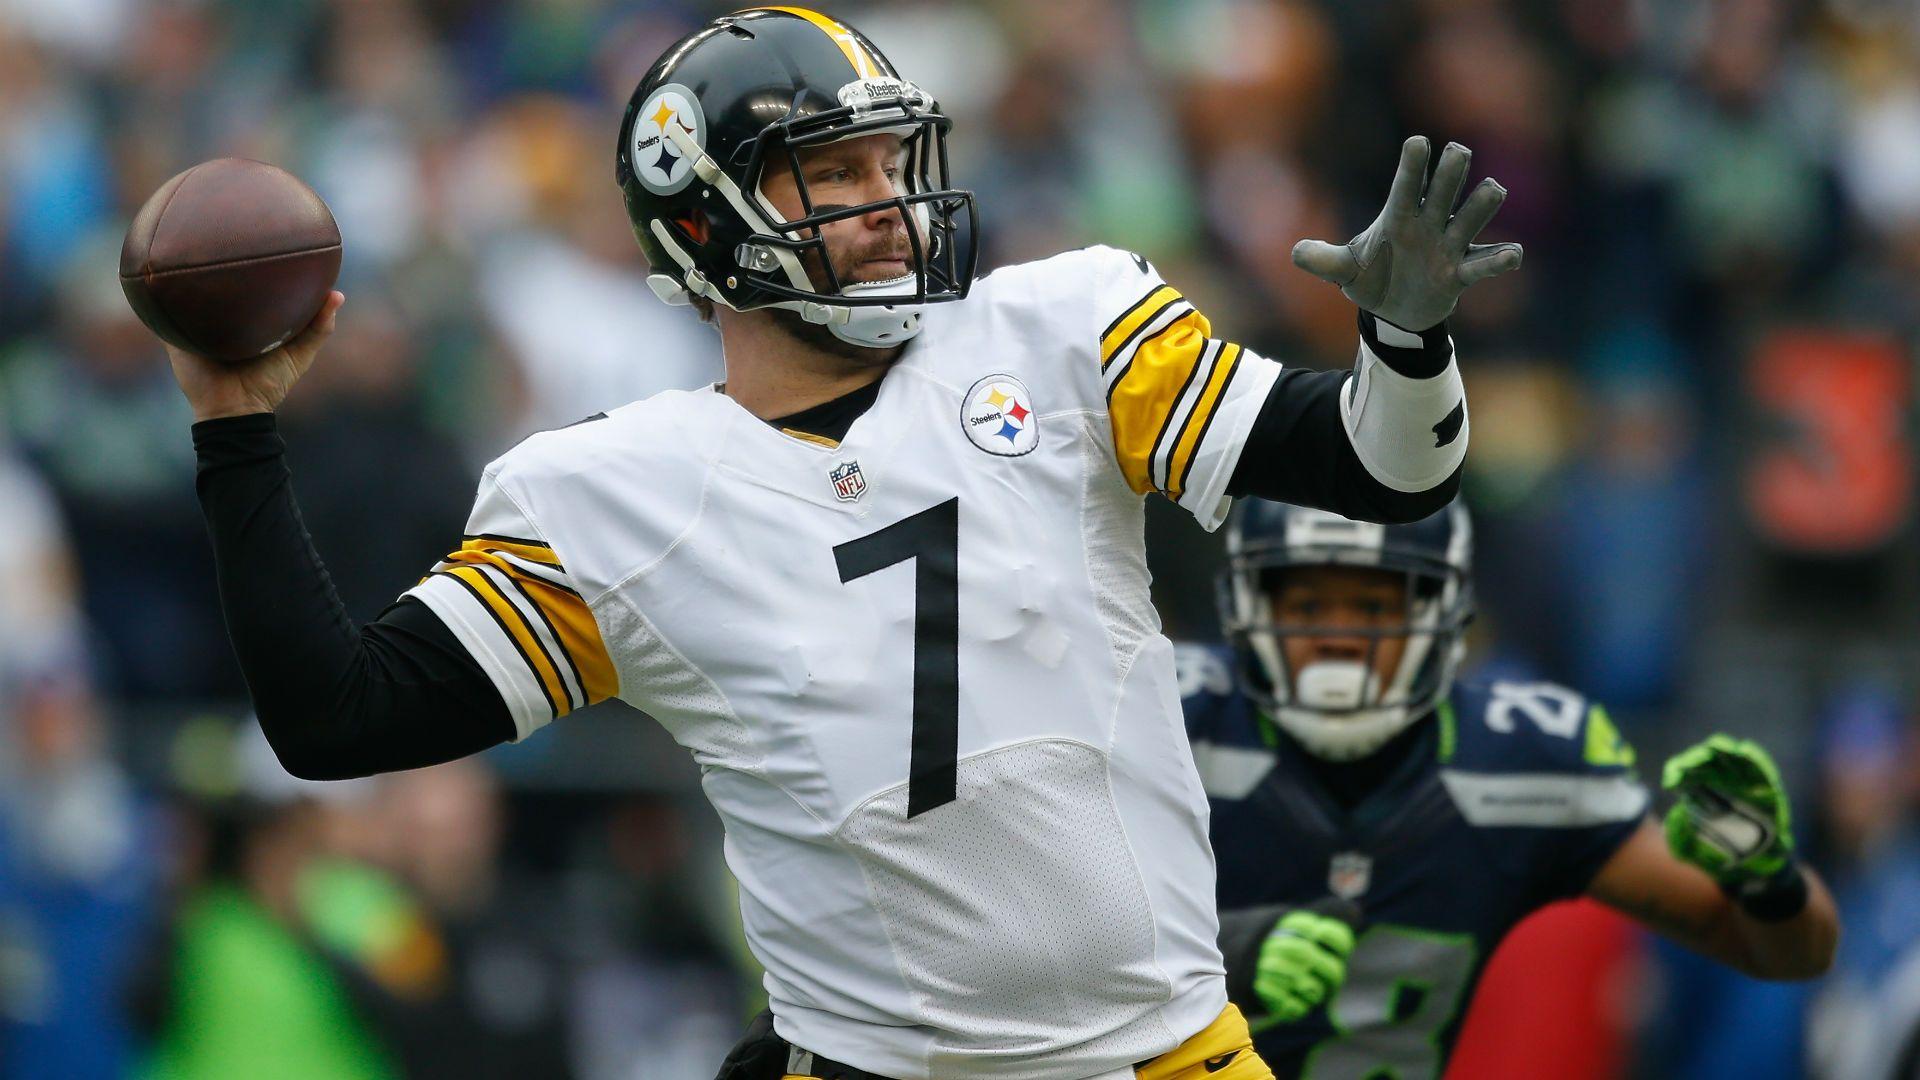 Ben Roethlisberger: Coming out of game 'doesn't make you less of a